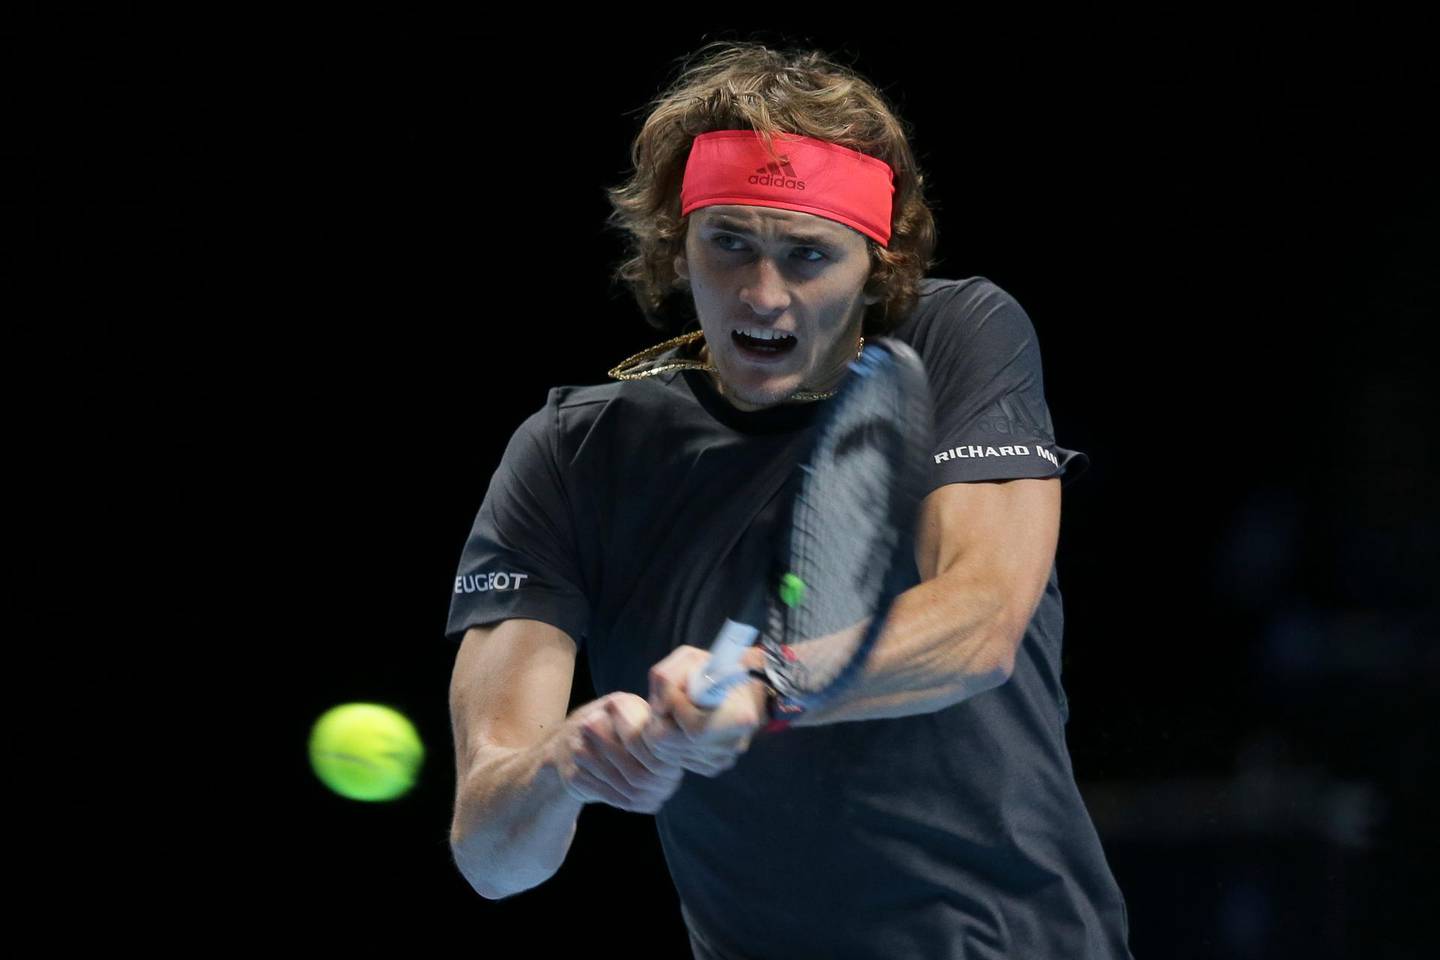 FILE - In this Nov. 17, 2018, file photo, Alexander Zverev of Germany plays a return to Roger Federer of Switzerland in their ATP World Tour Finals singles tennis match at O2 Arena in London. Zverev is one of the men to keep an eye on at the Australian Open, Jan. 14-27, 2019. (AP Photo/Tim Ireland, File)